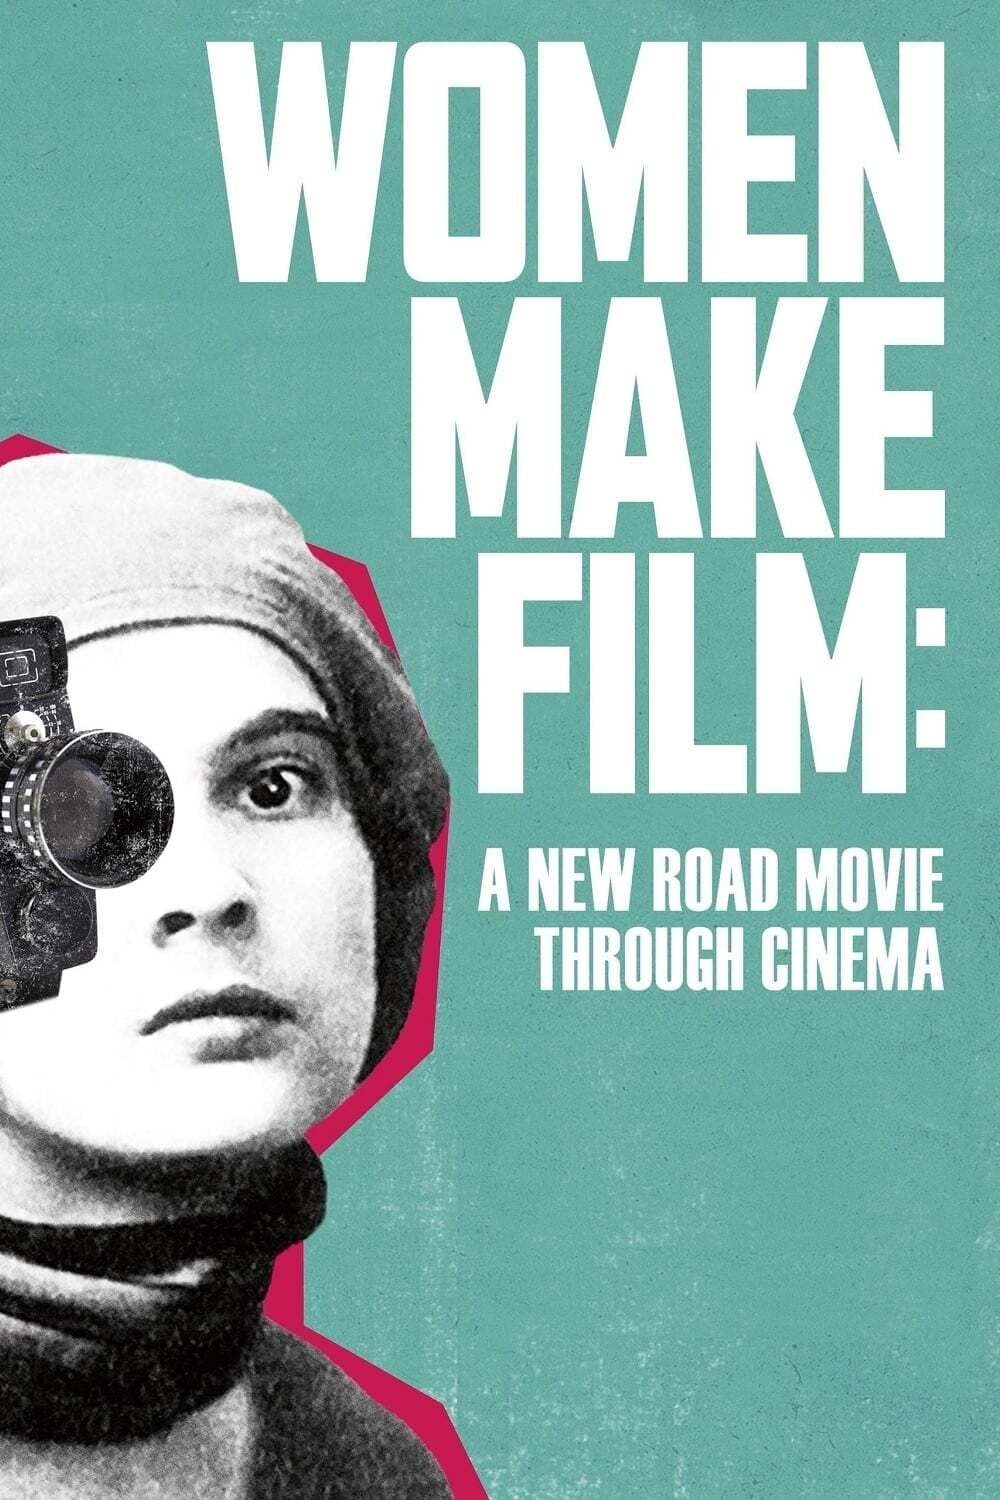 Women Make Film: A New Road Movie Through Cinema TV Shows About Equality